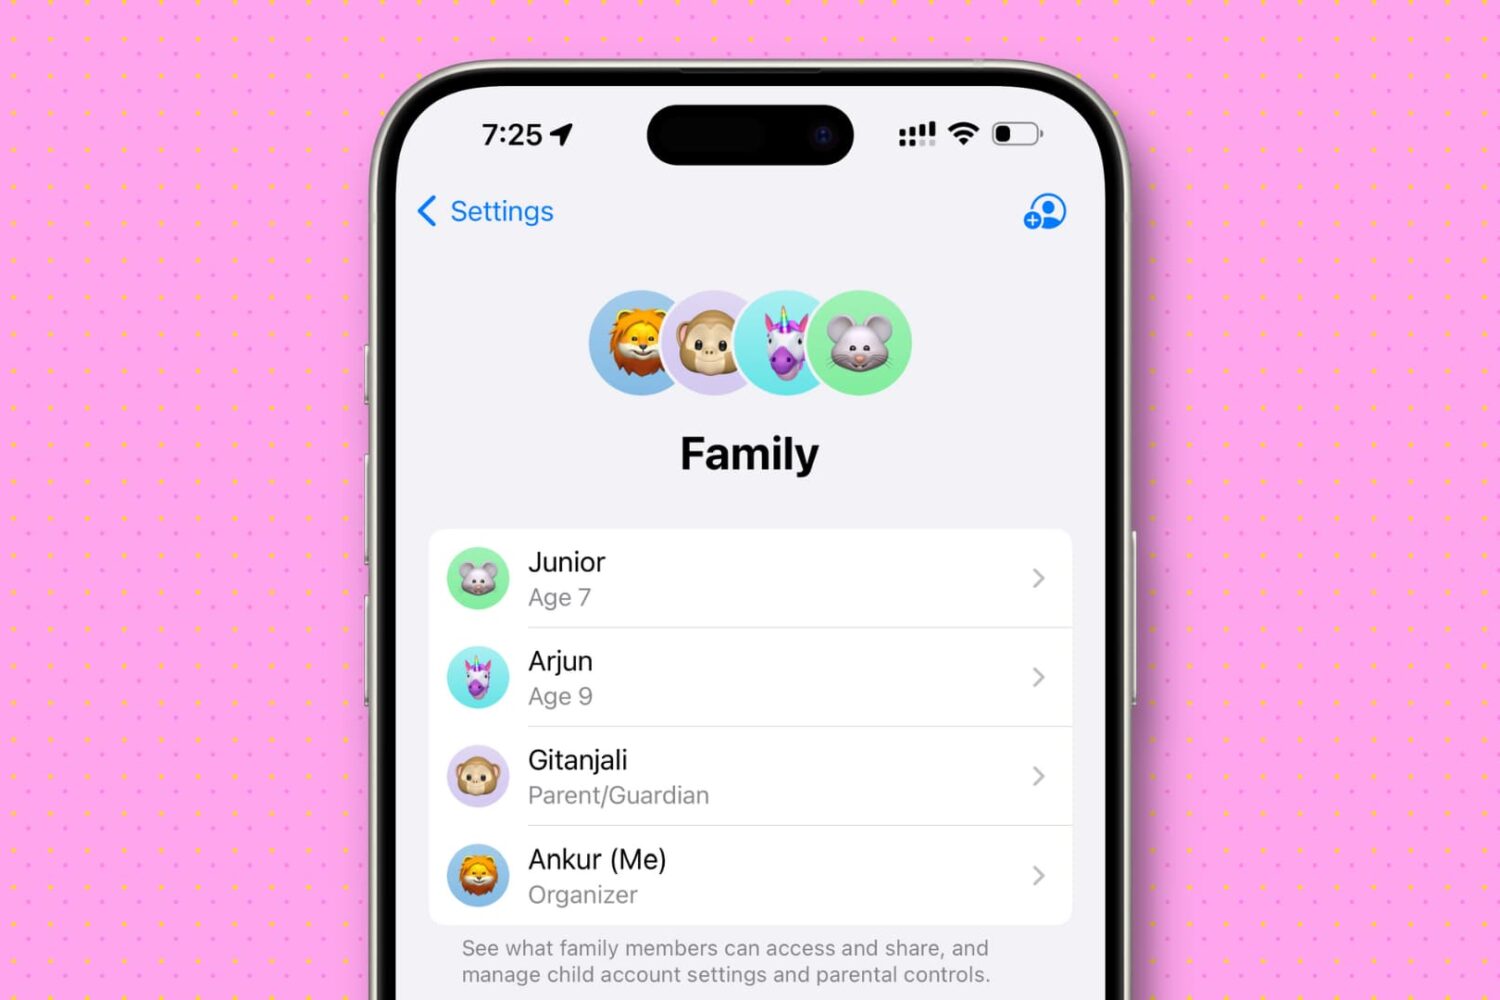 Family screen showing all family members in iPhone settings